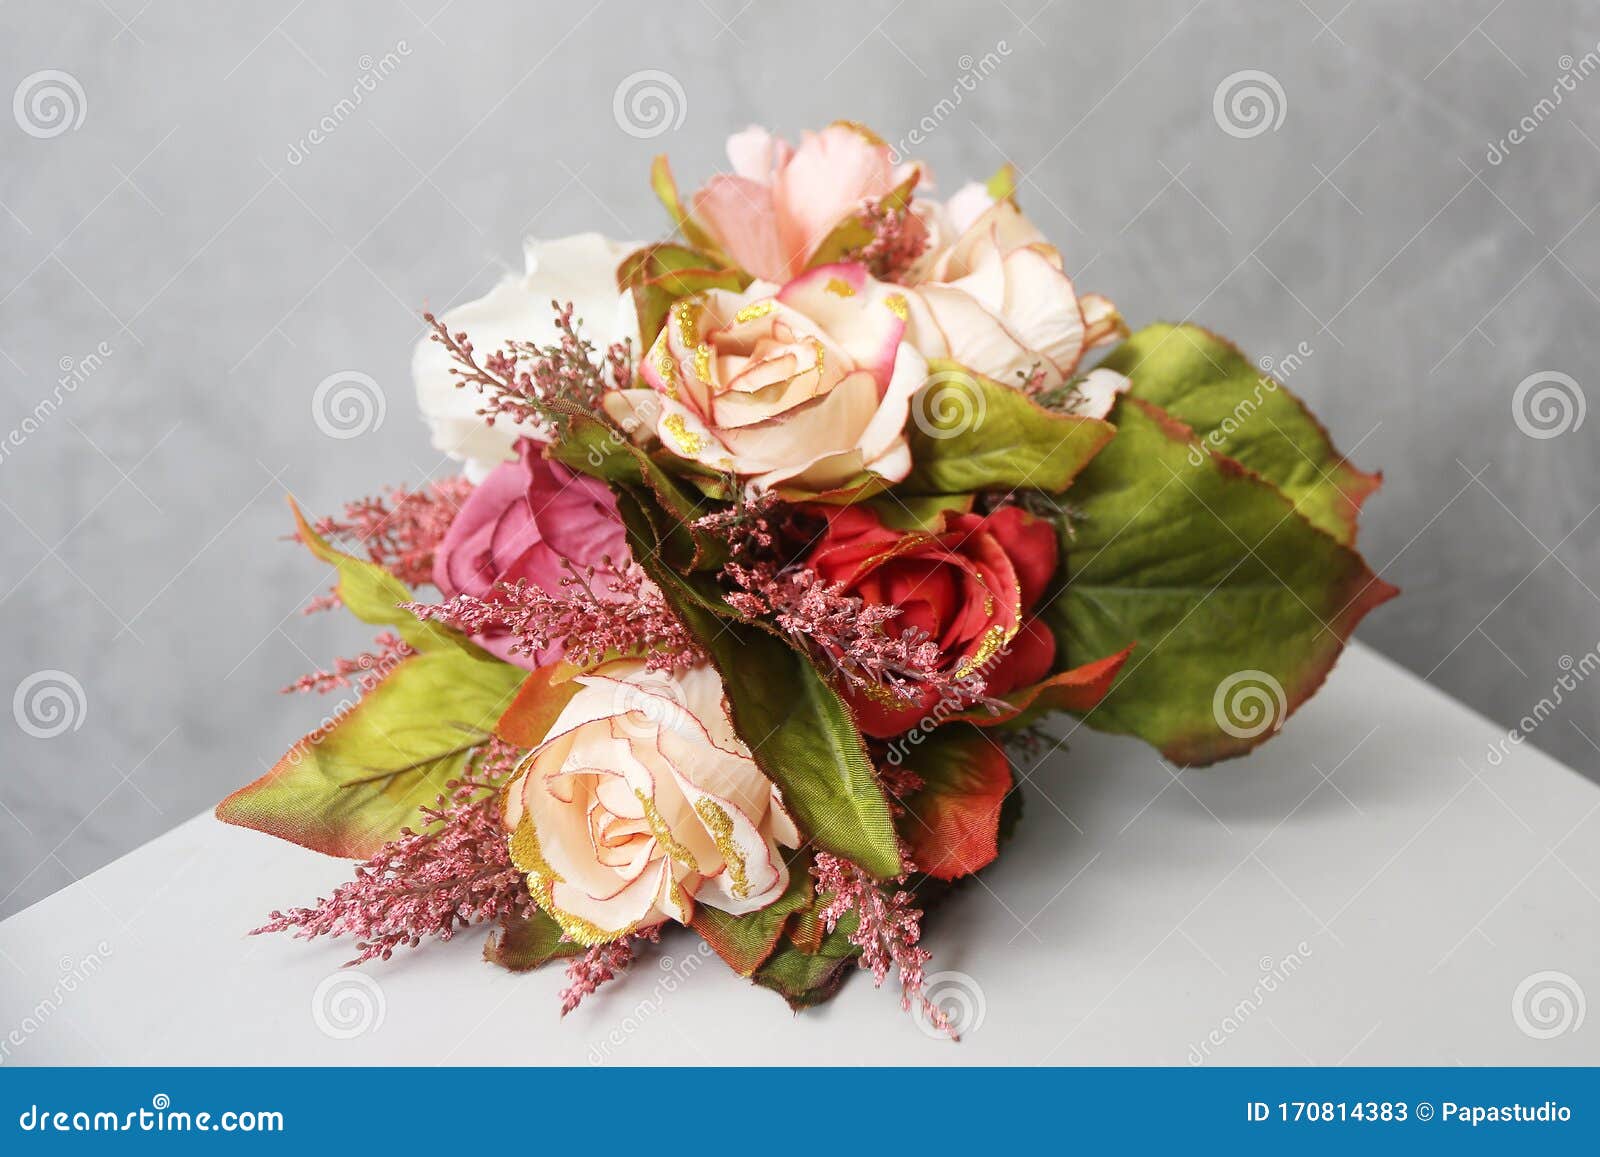 Beautiful Bouquet of Roses for Valentine S Day Stock Image - Image of ...